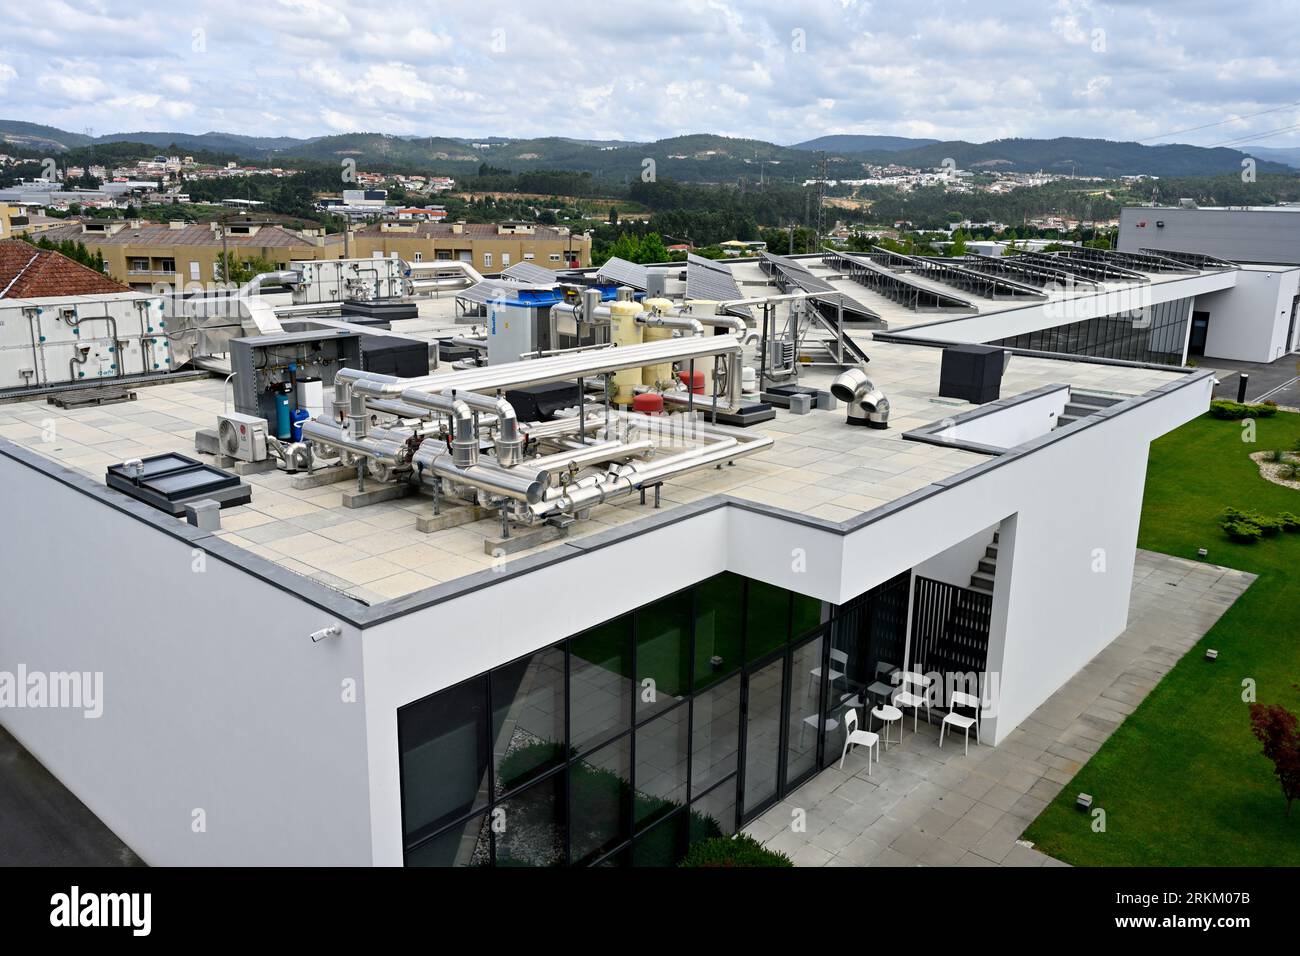 The complexity of pipes and cylinders atop a building with solar thermal panels and heat pumps, roof of CentroDial, dialysis center, São João da Madei Stock Photo